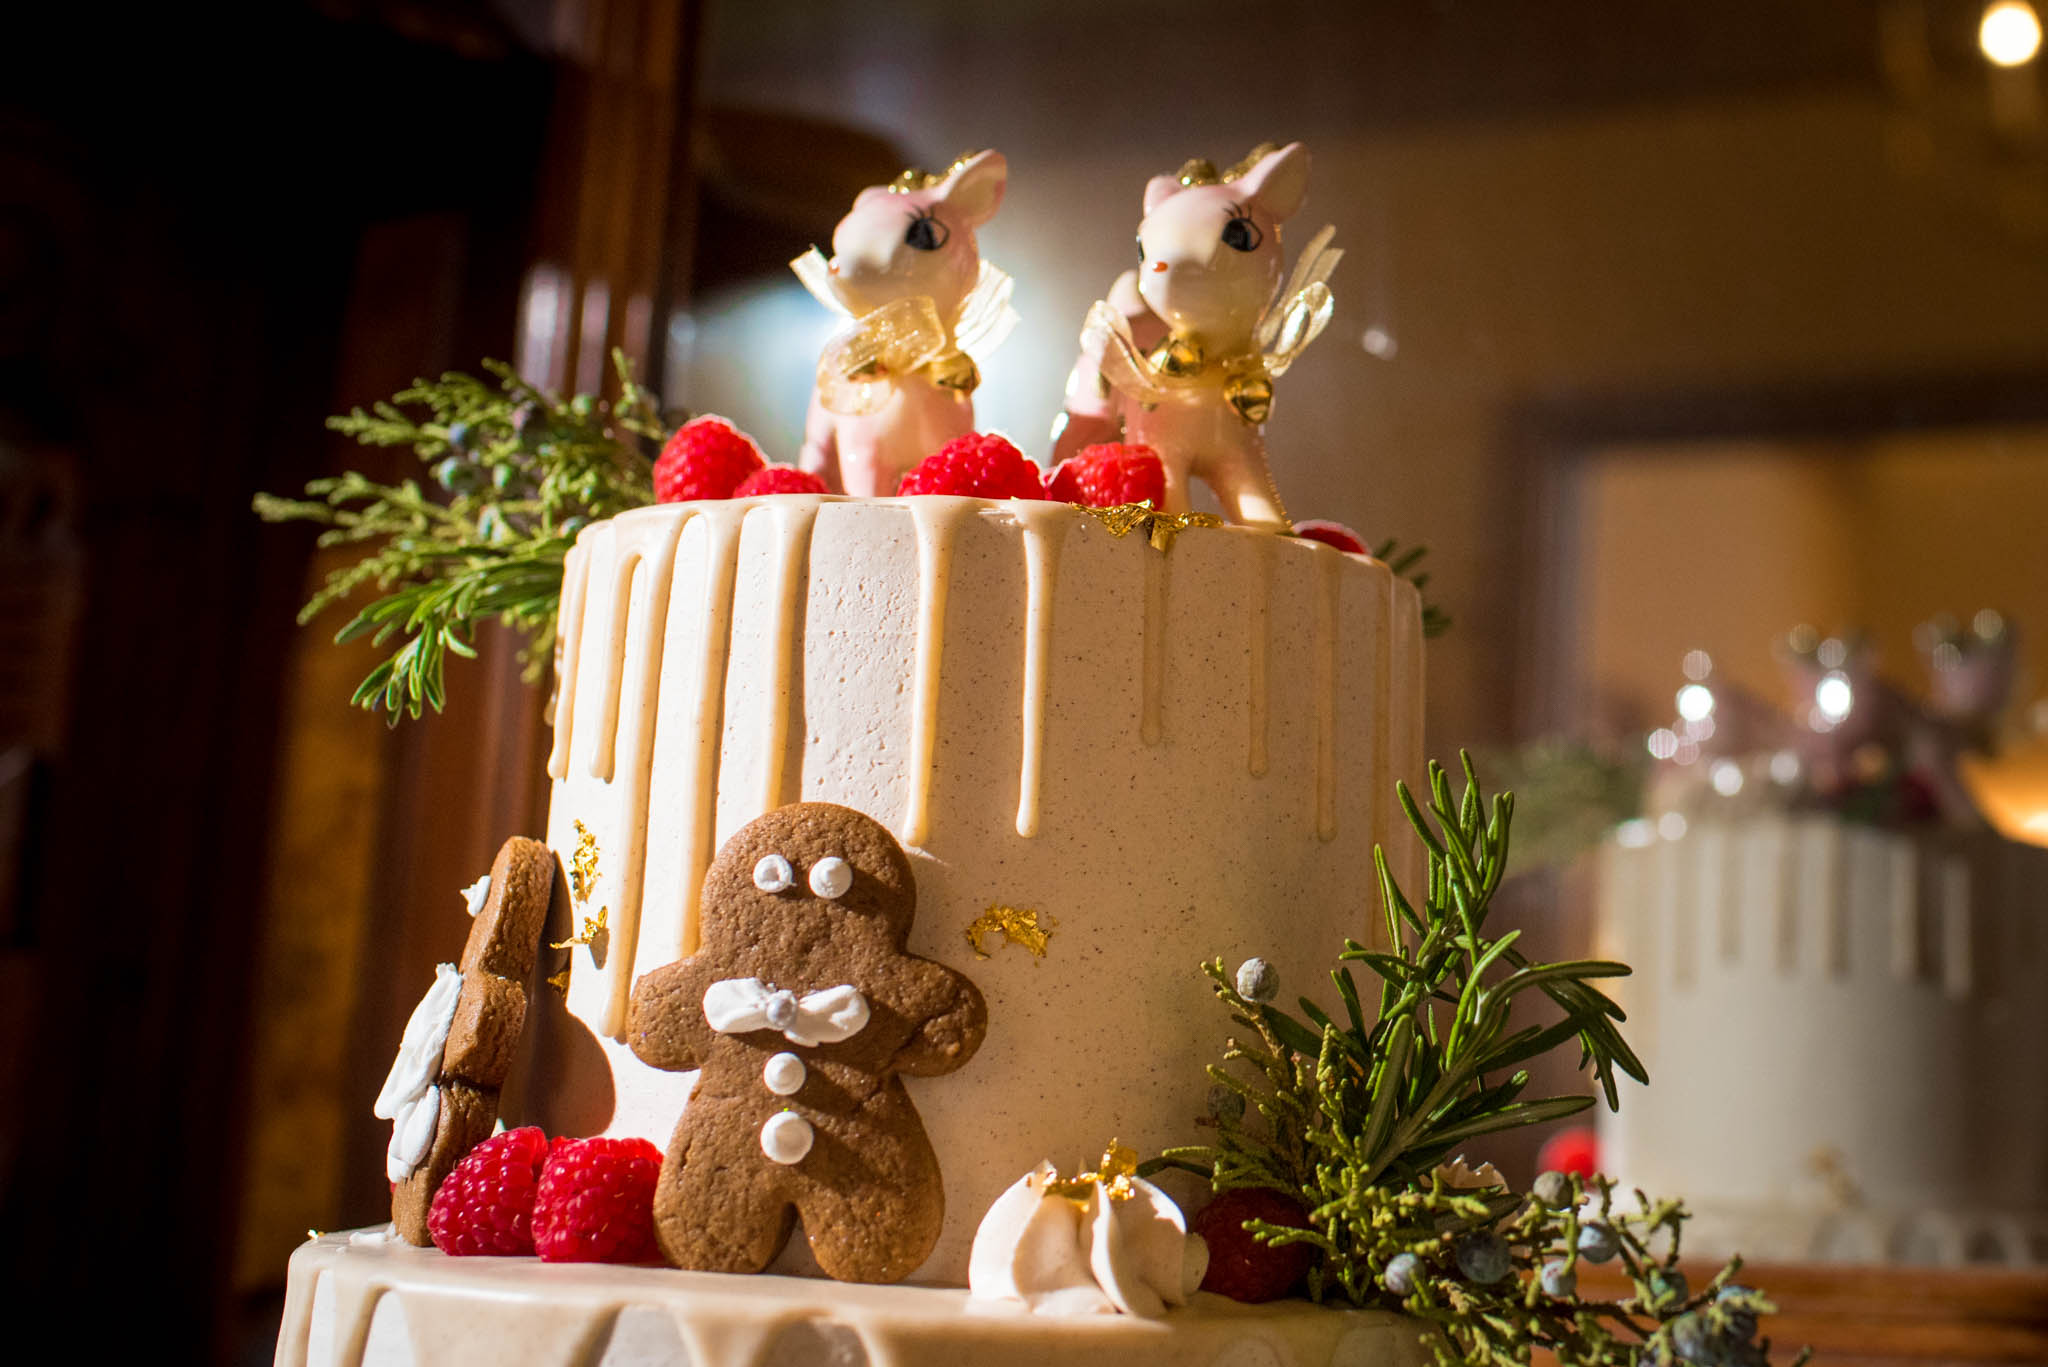 Christmas themed wedding cake with reindeer decorations